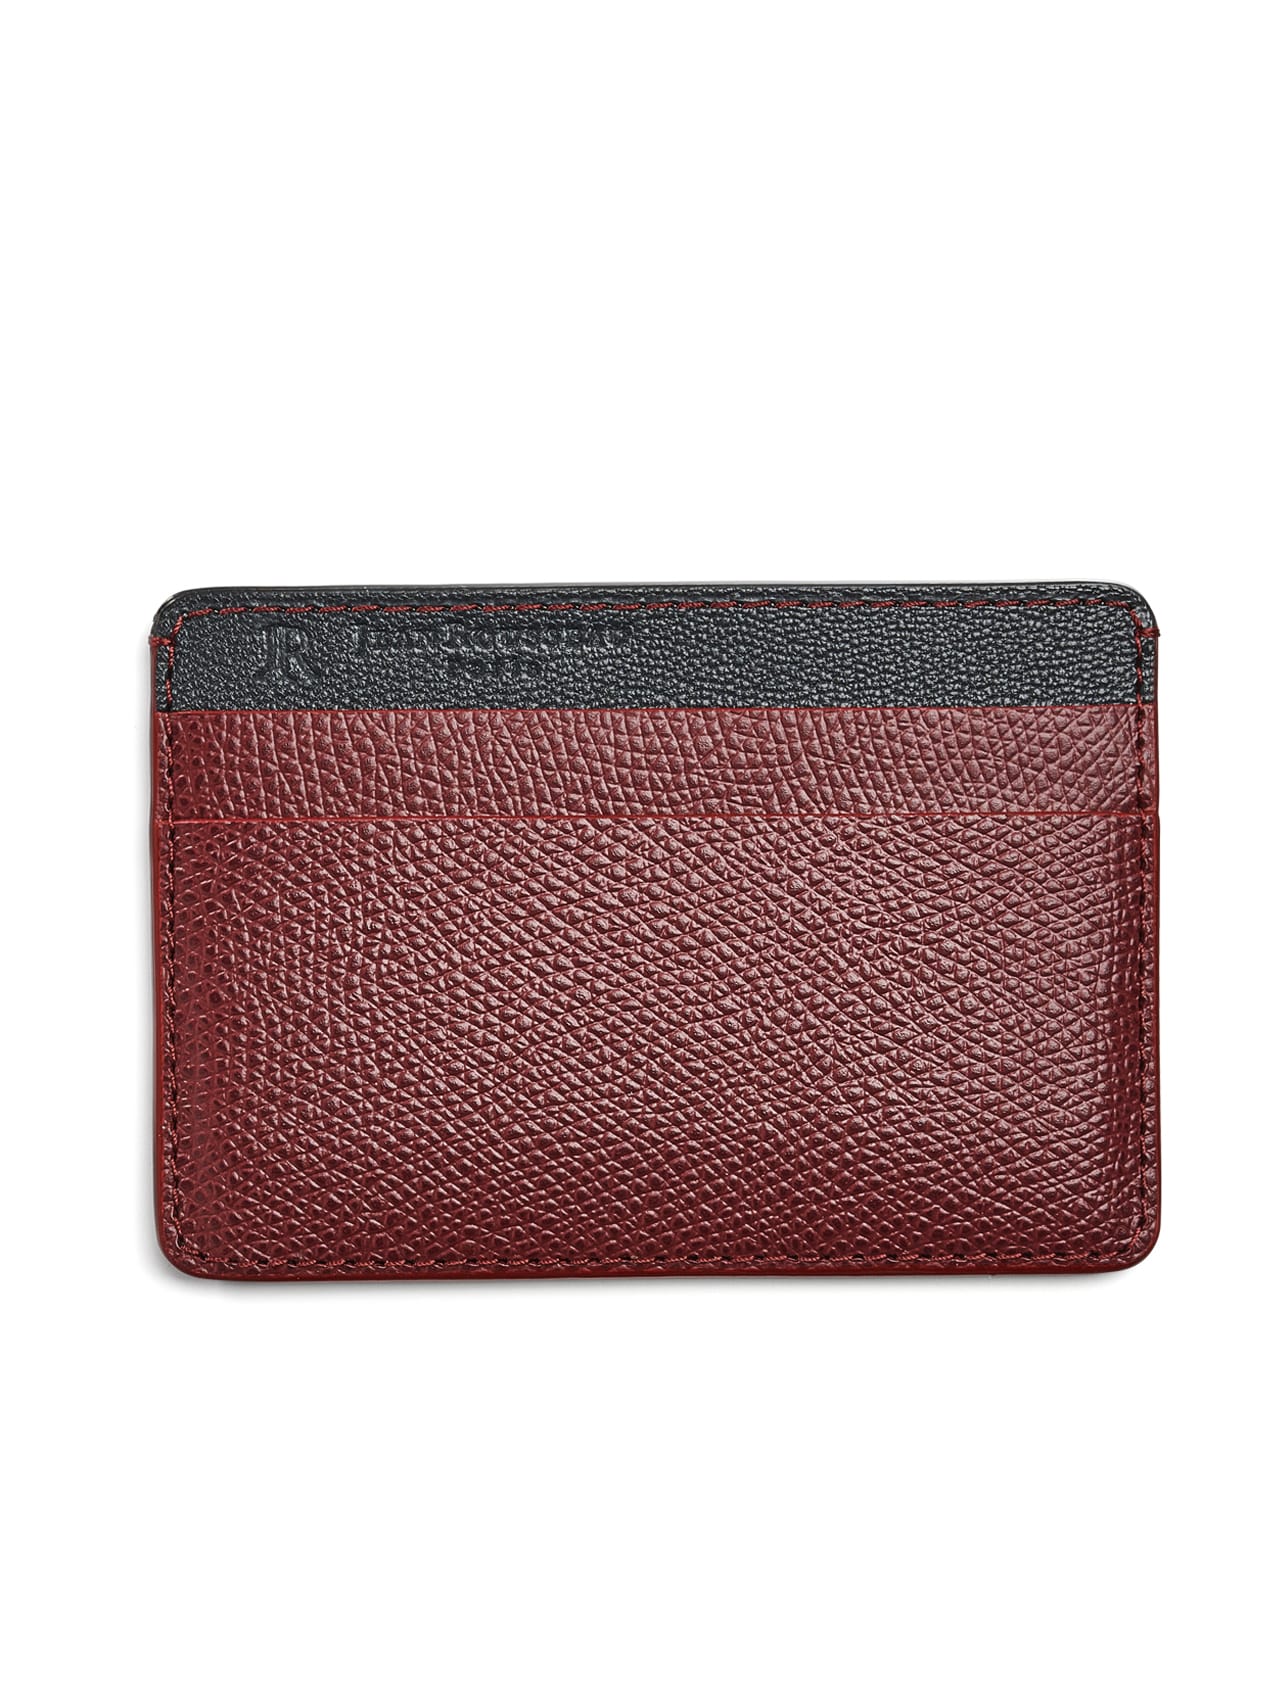 Red Embossed Louis Vuitton Wallet